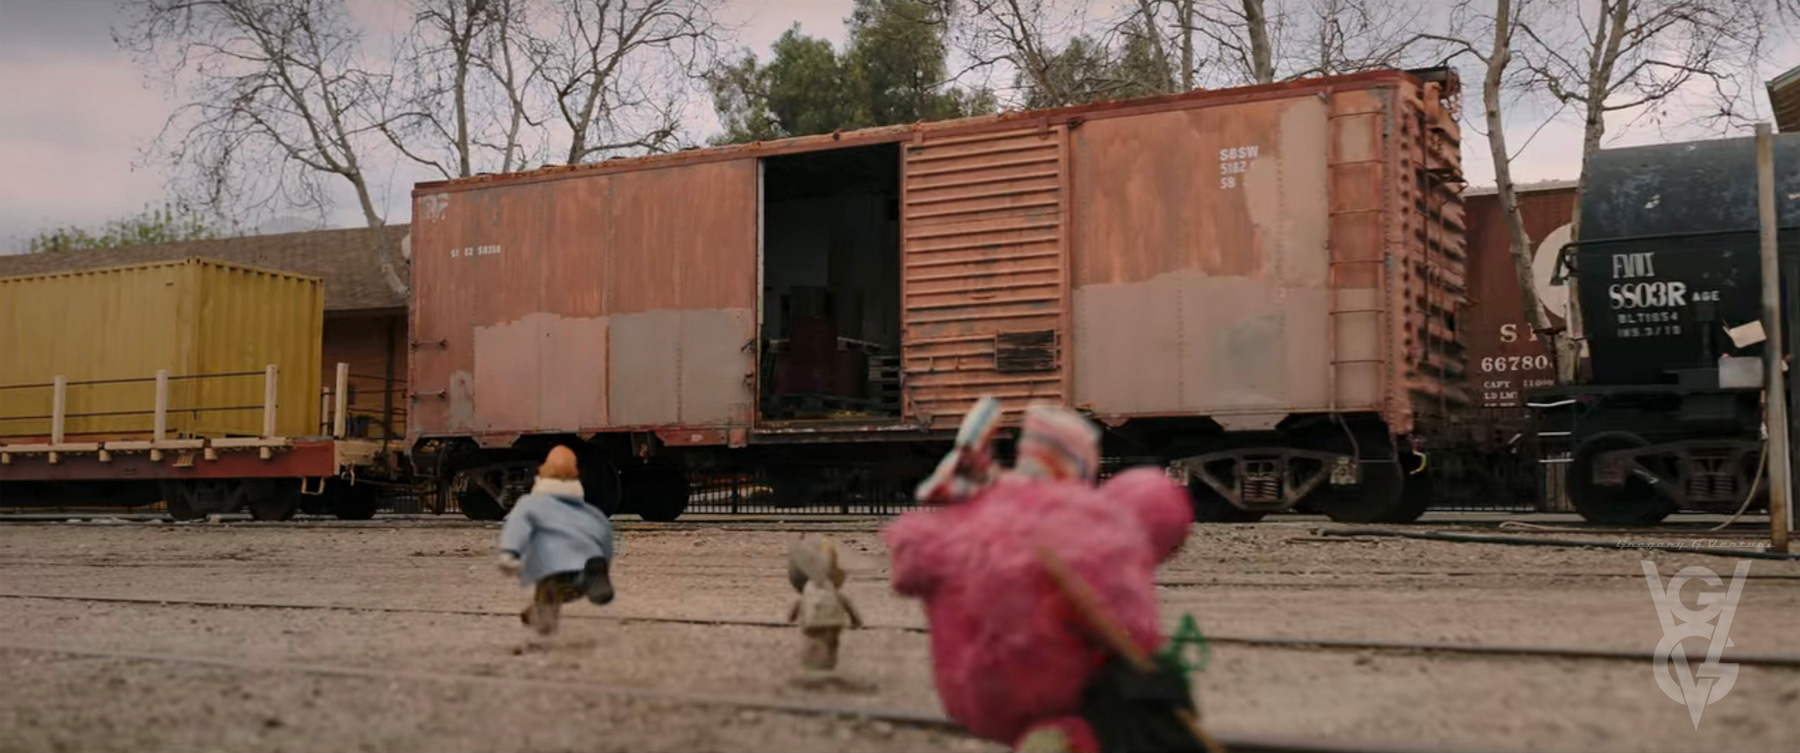 1 Lost Ollie Boxcar Vfx Augmented Stock Footage Screen Still